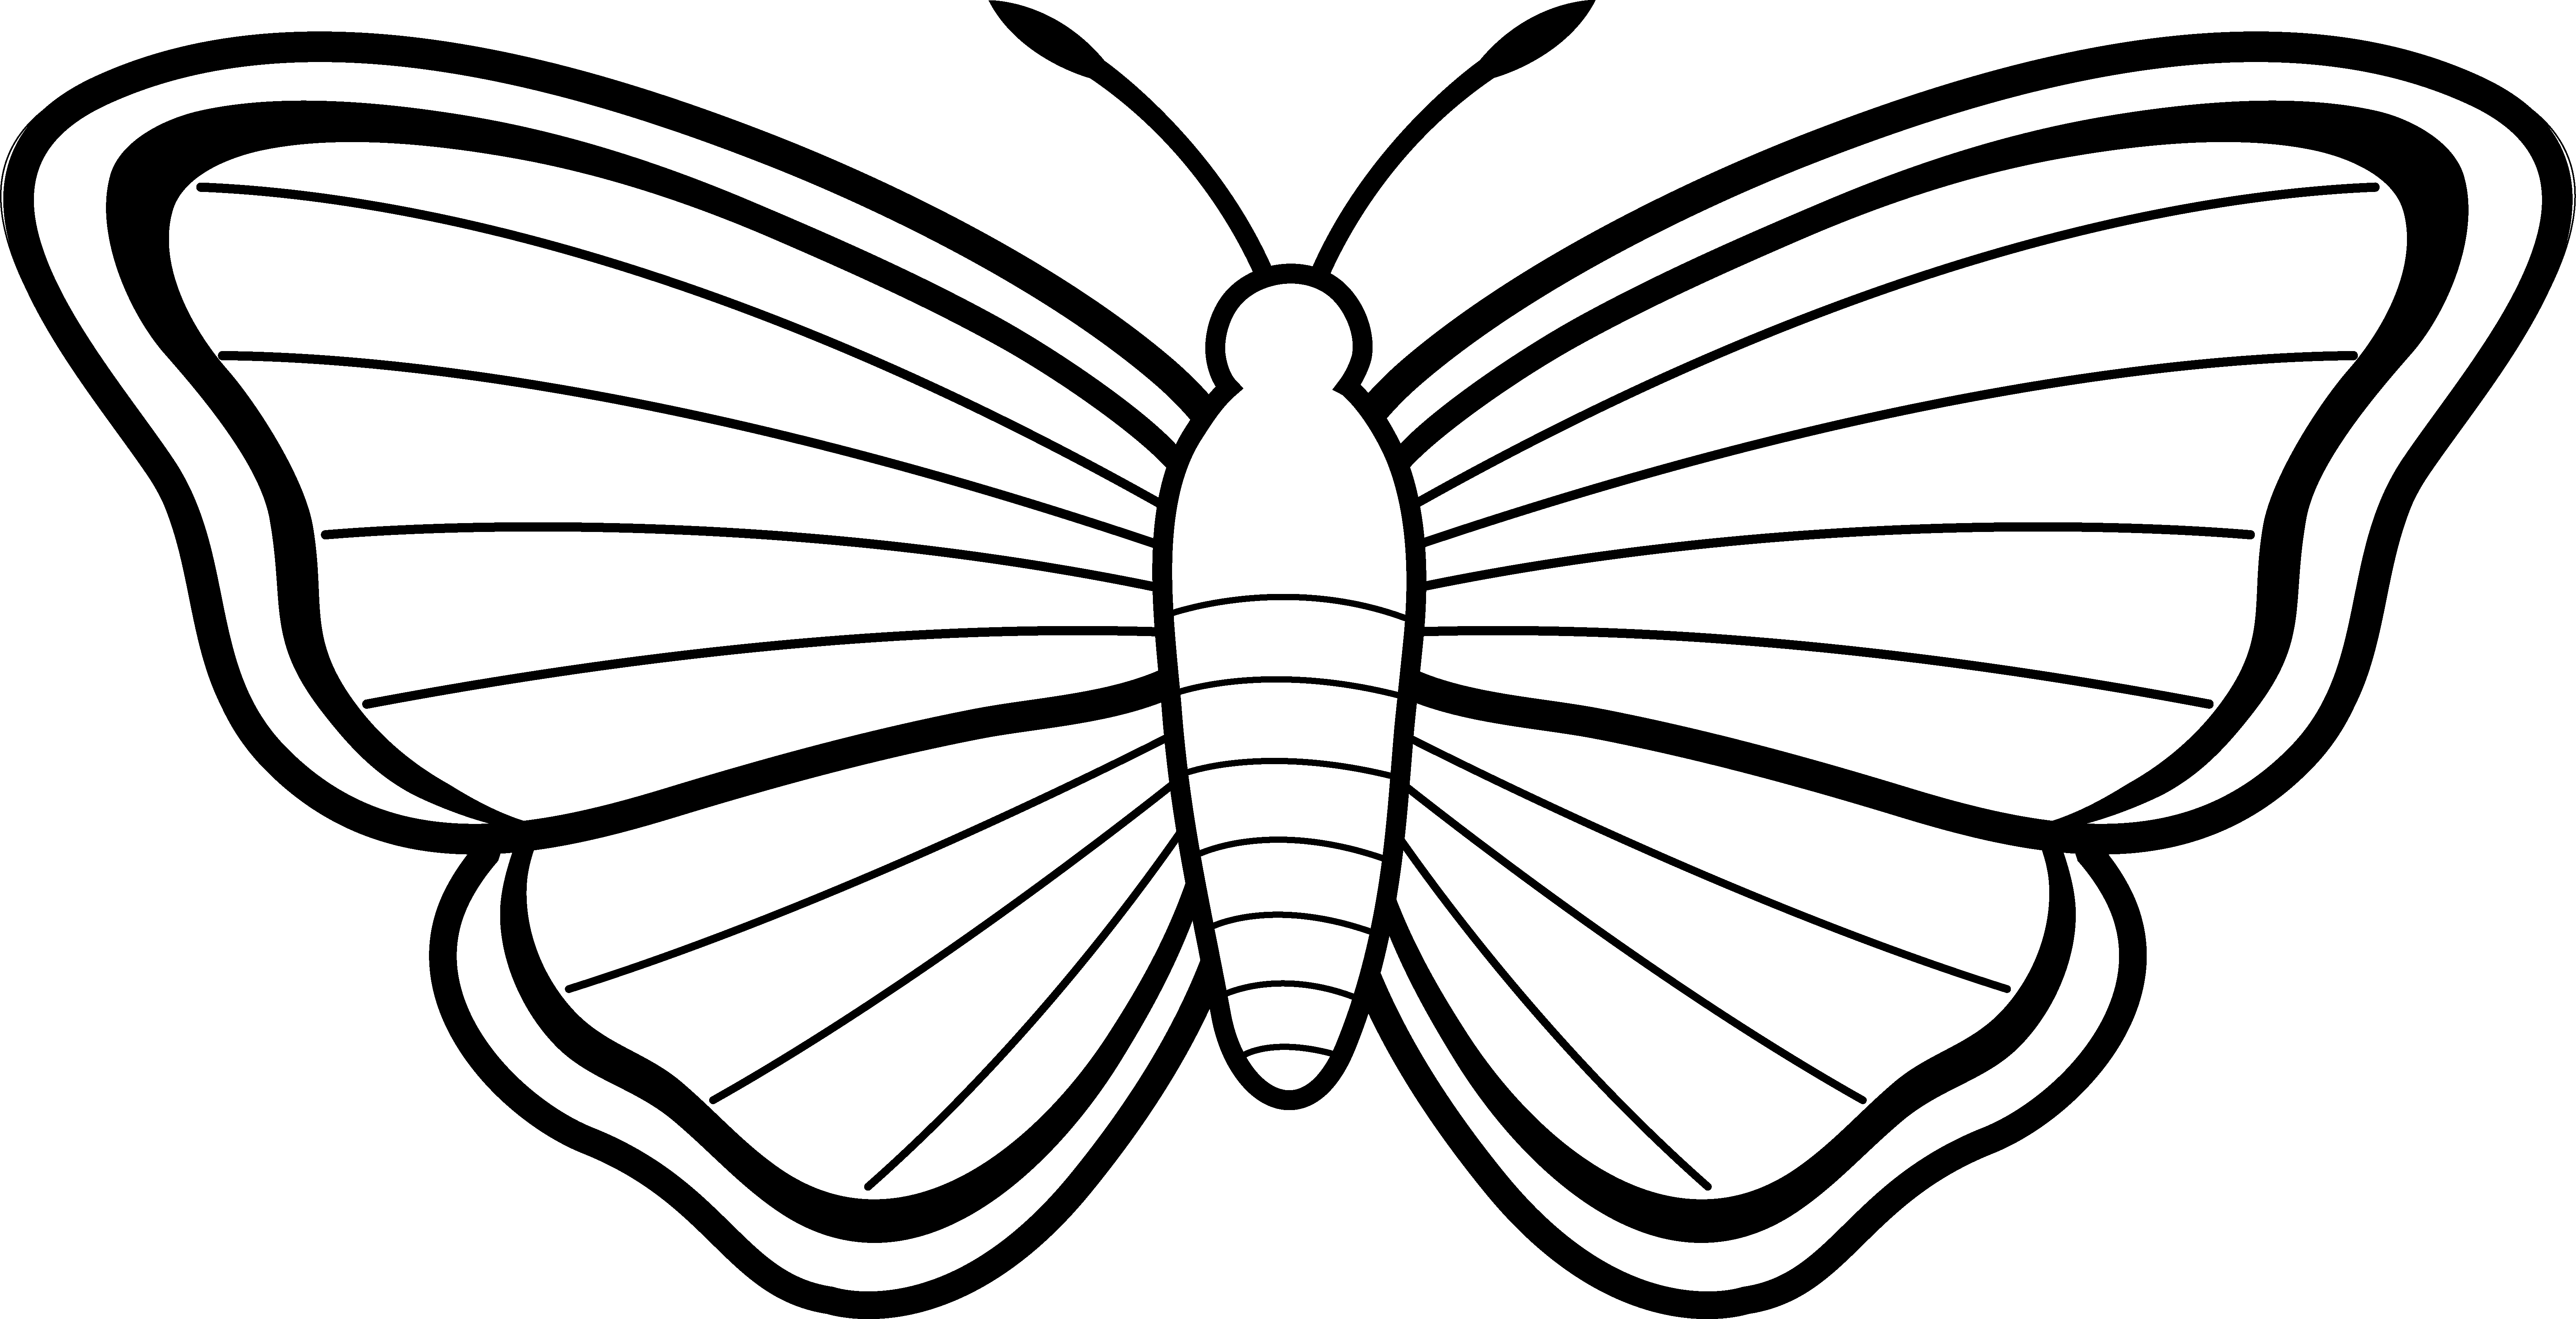 Free butterflies black and. Butterfly clipart line drawing